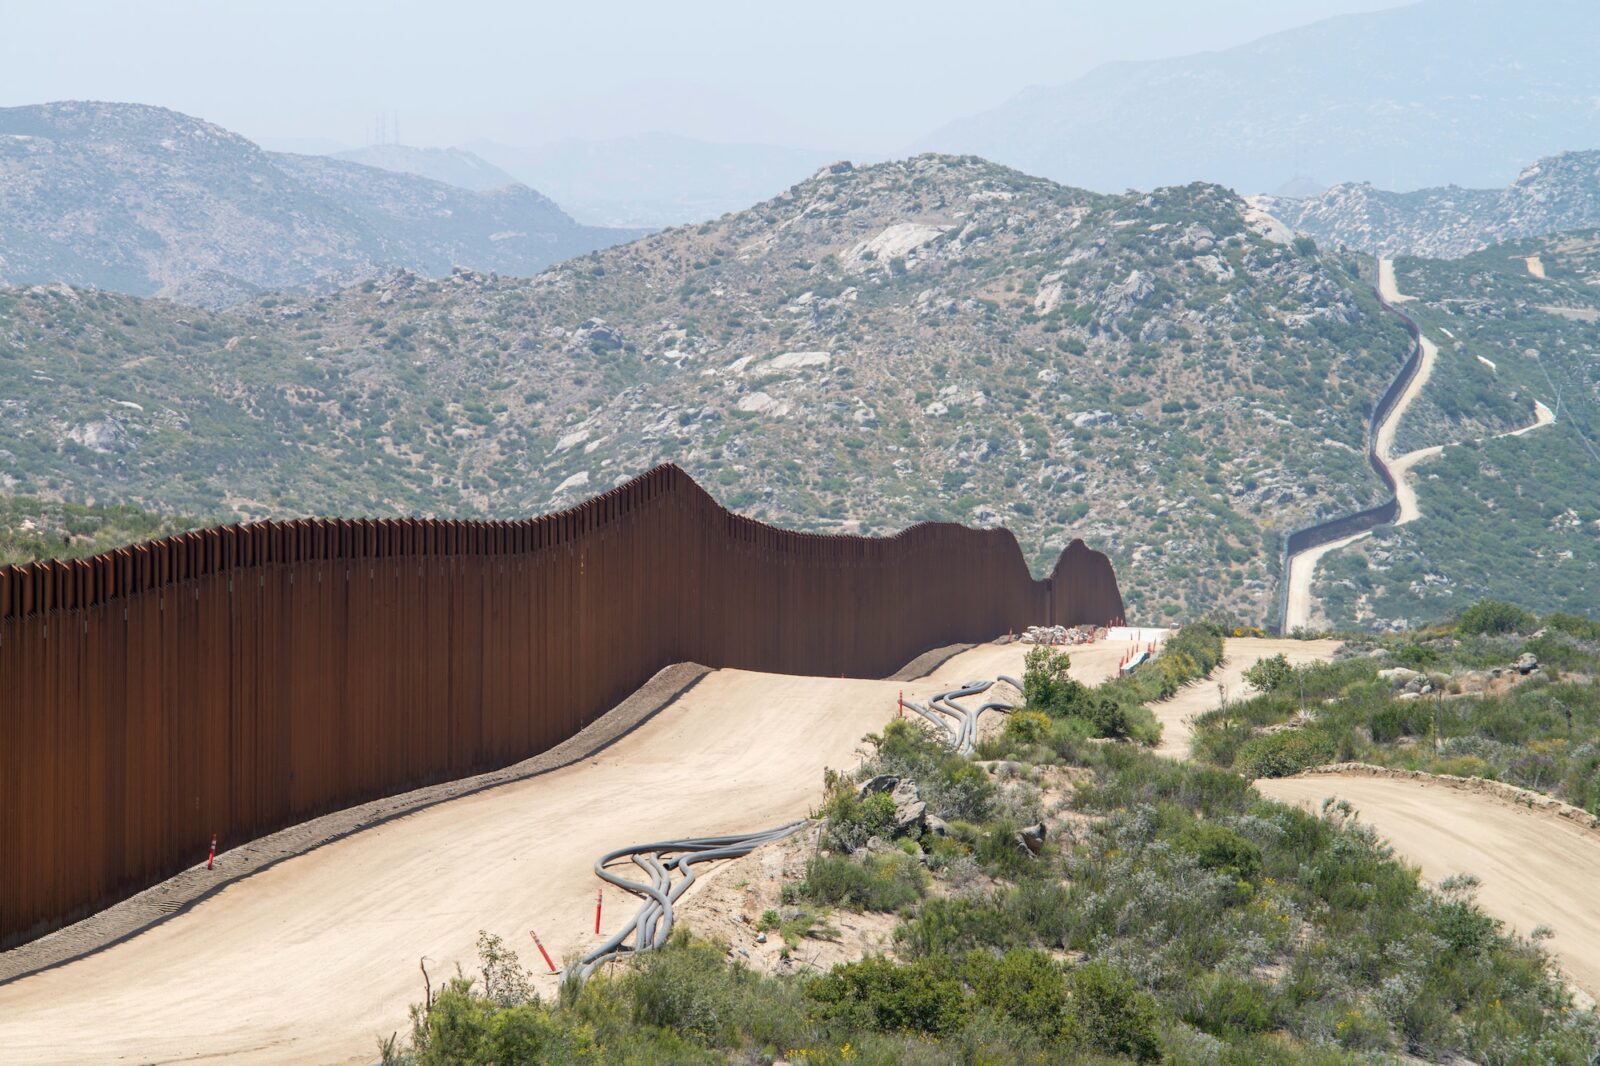 U.S./Mexico border with wall in foreground and mountains behind